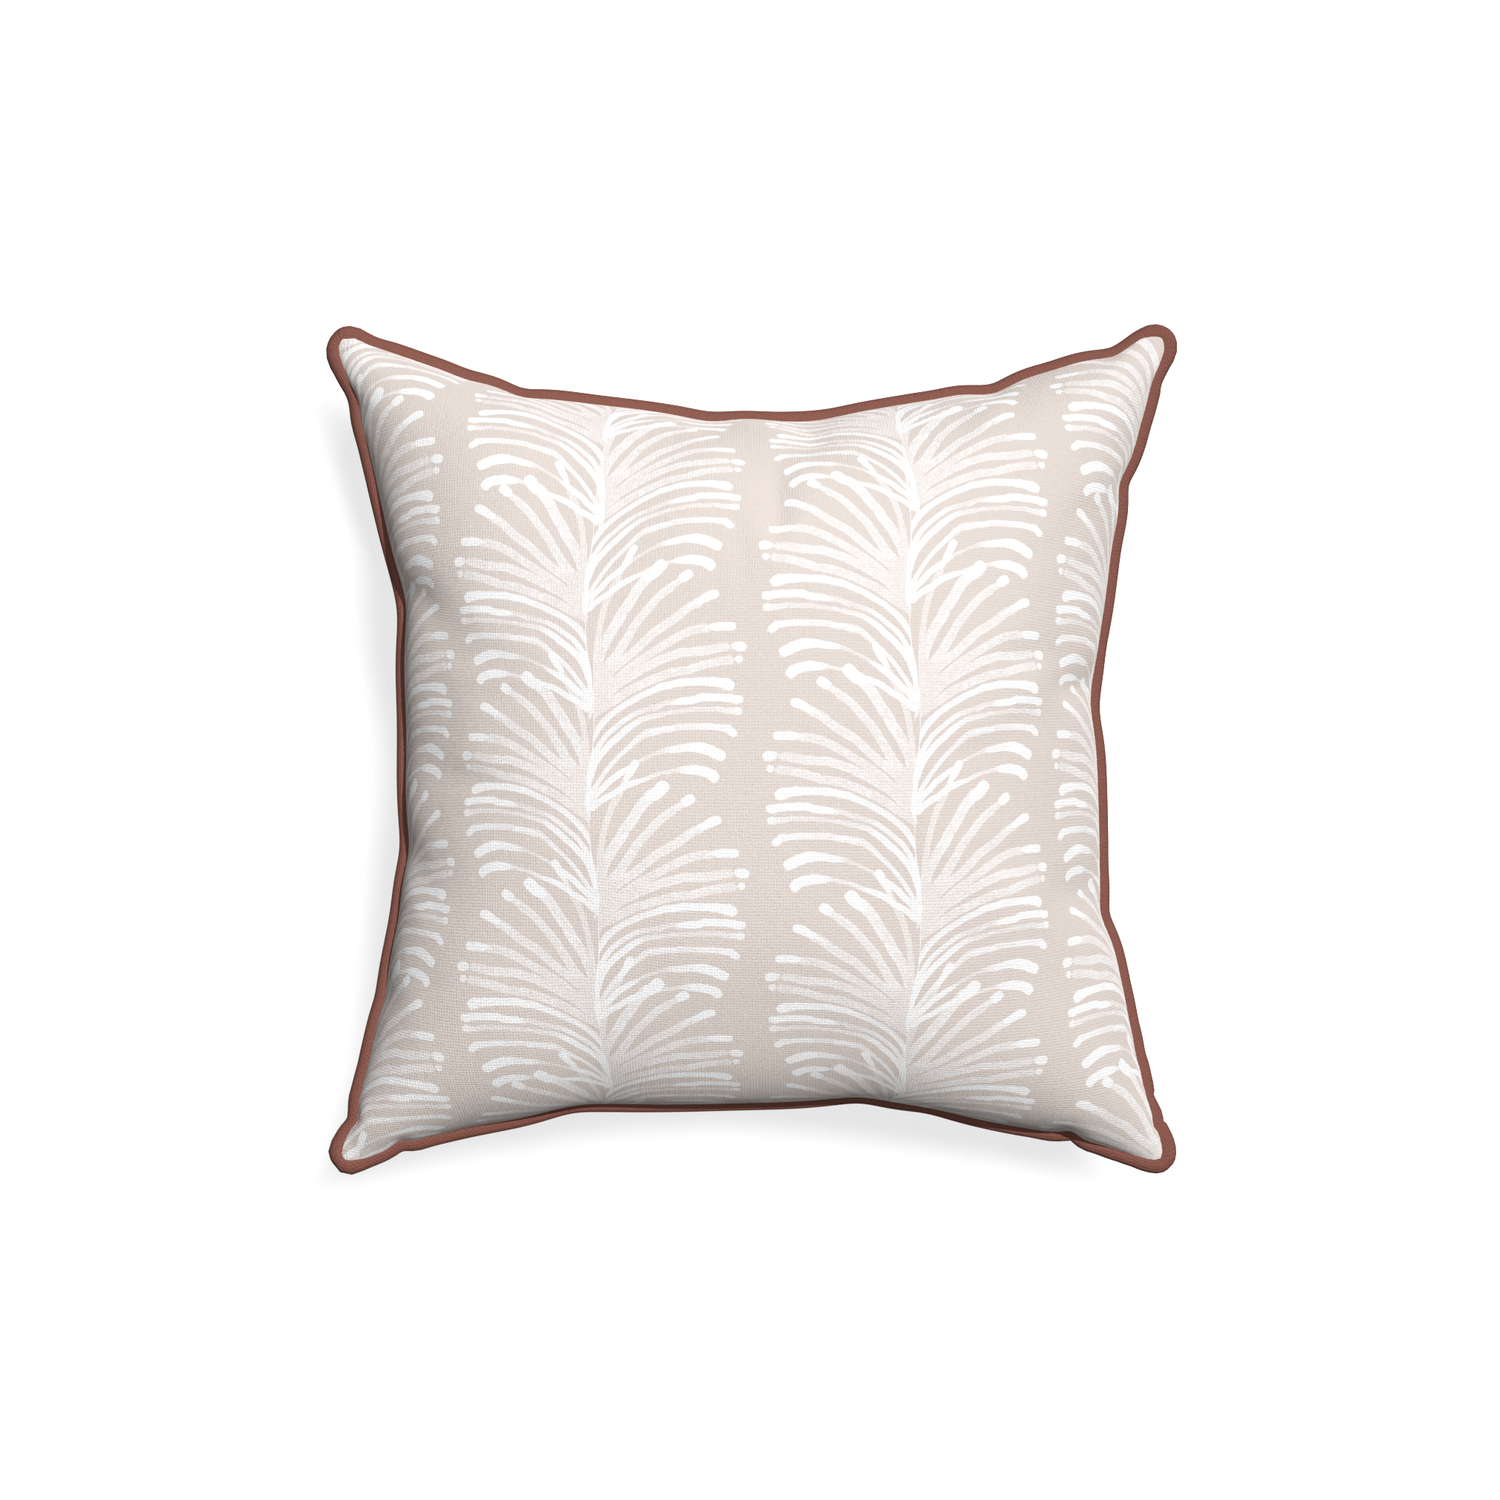 18-square emma sand custom pillow with w piping on white background